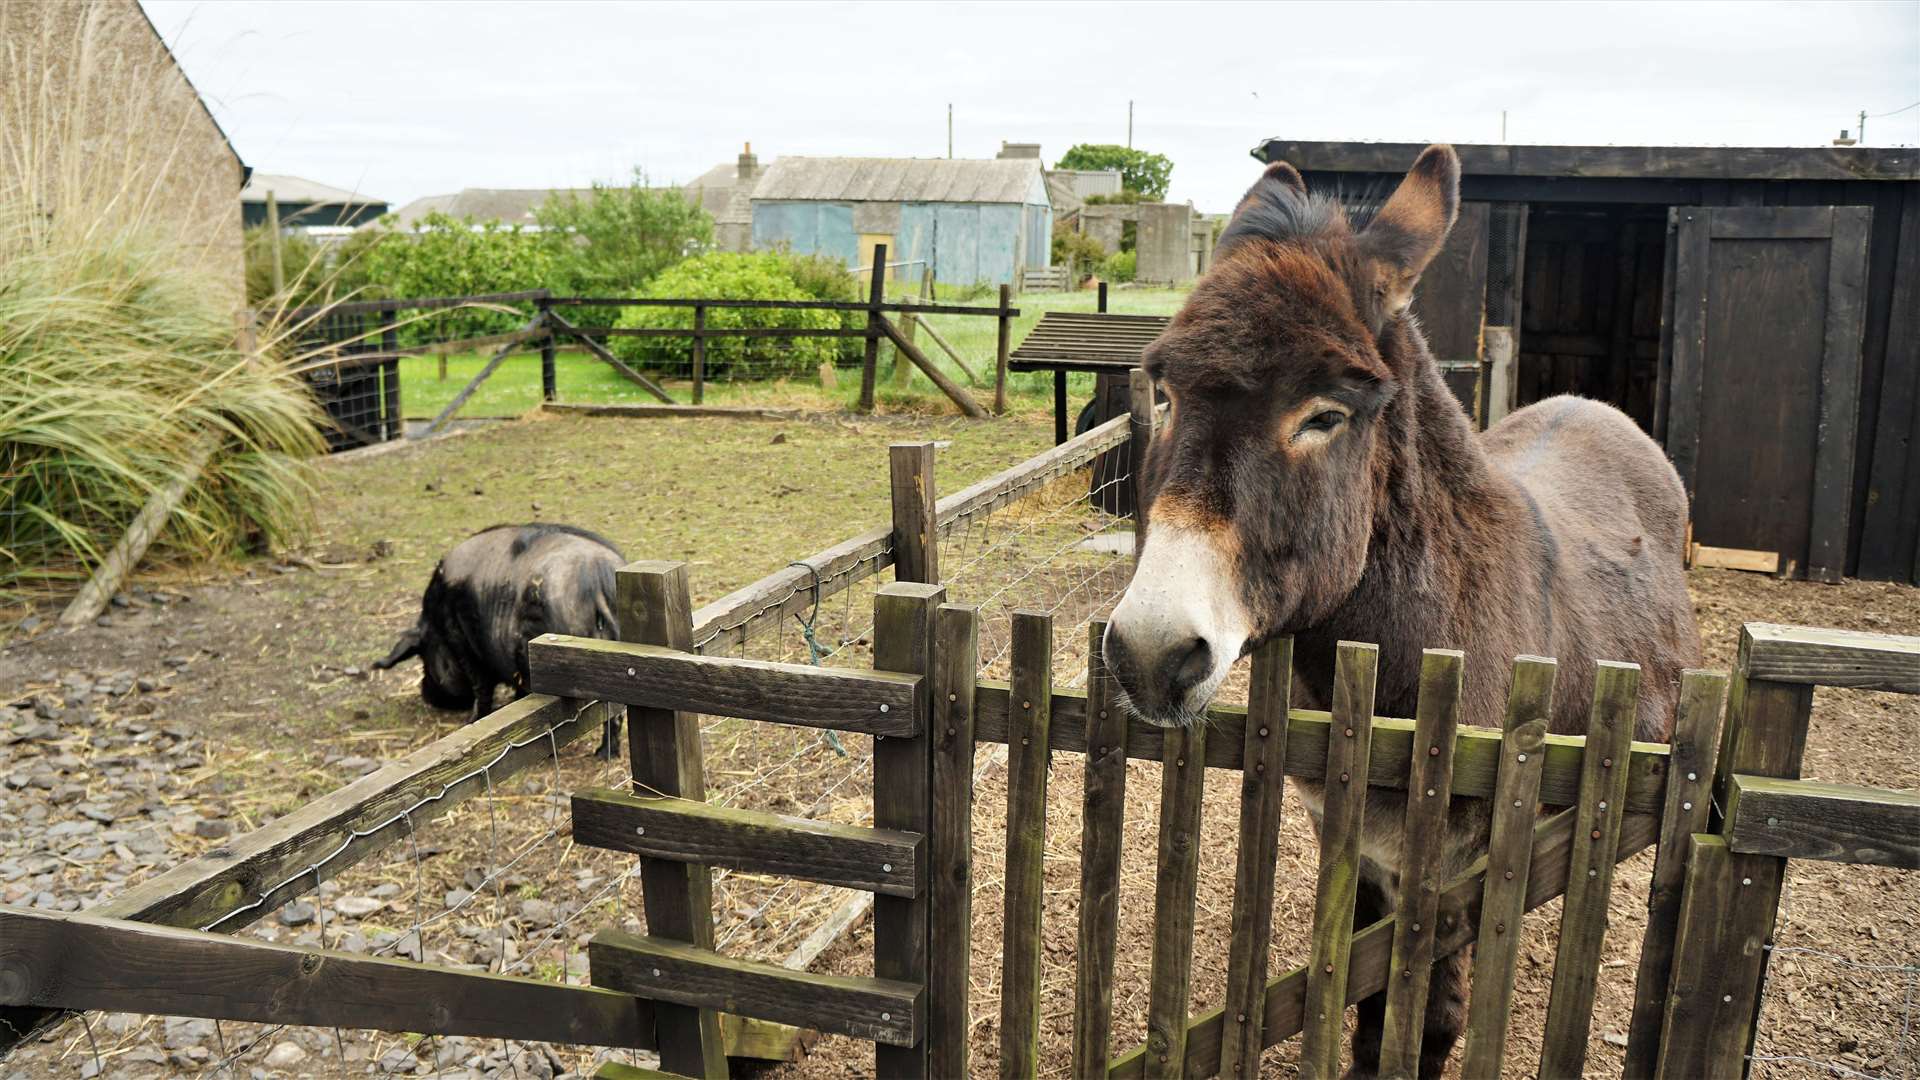 The animals were all found to be in a healthy condition at Puffin Croft and the owner thinks jealousy may have been a motive for the complaint. Picture: DGS